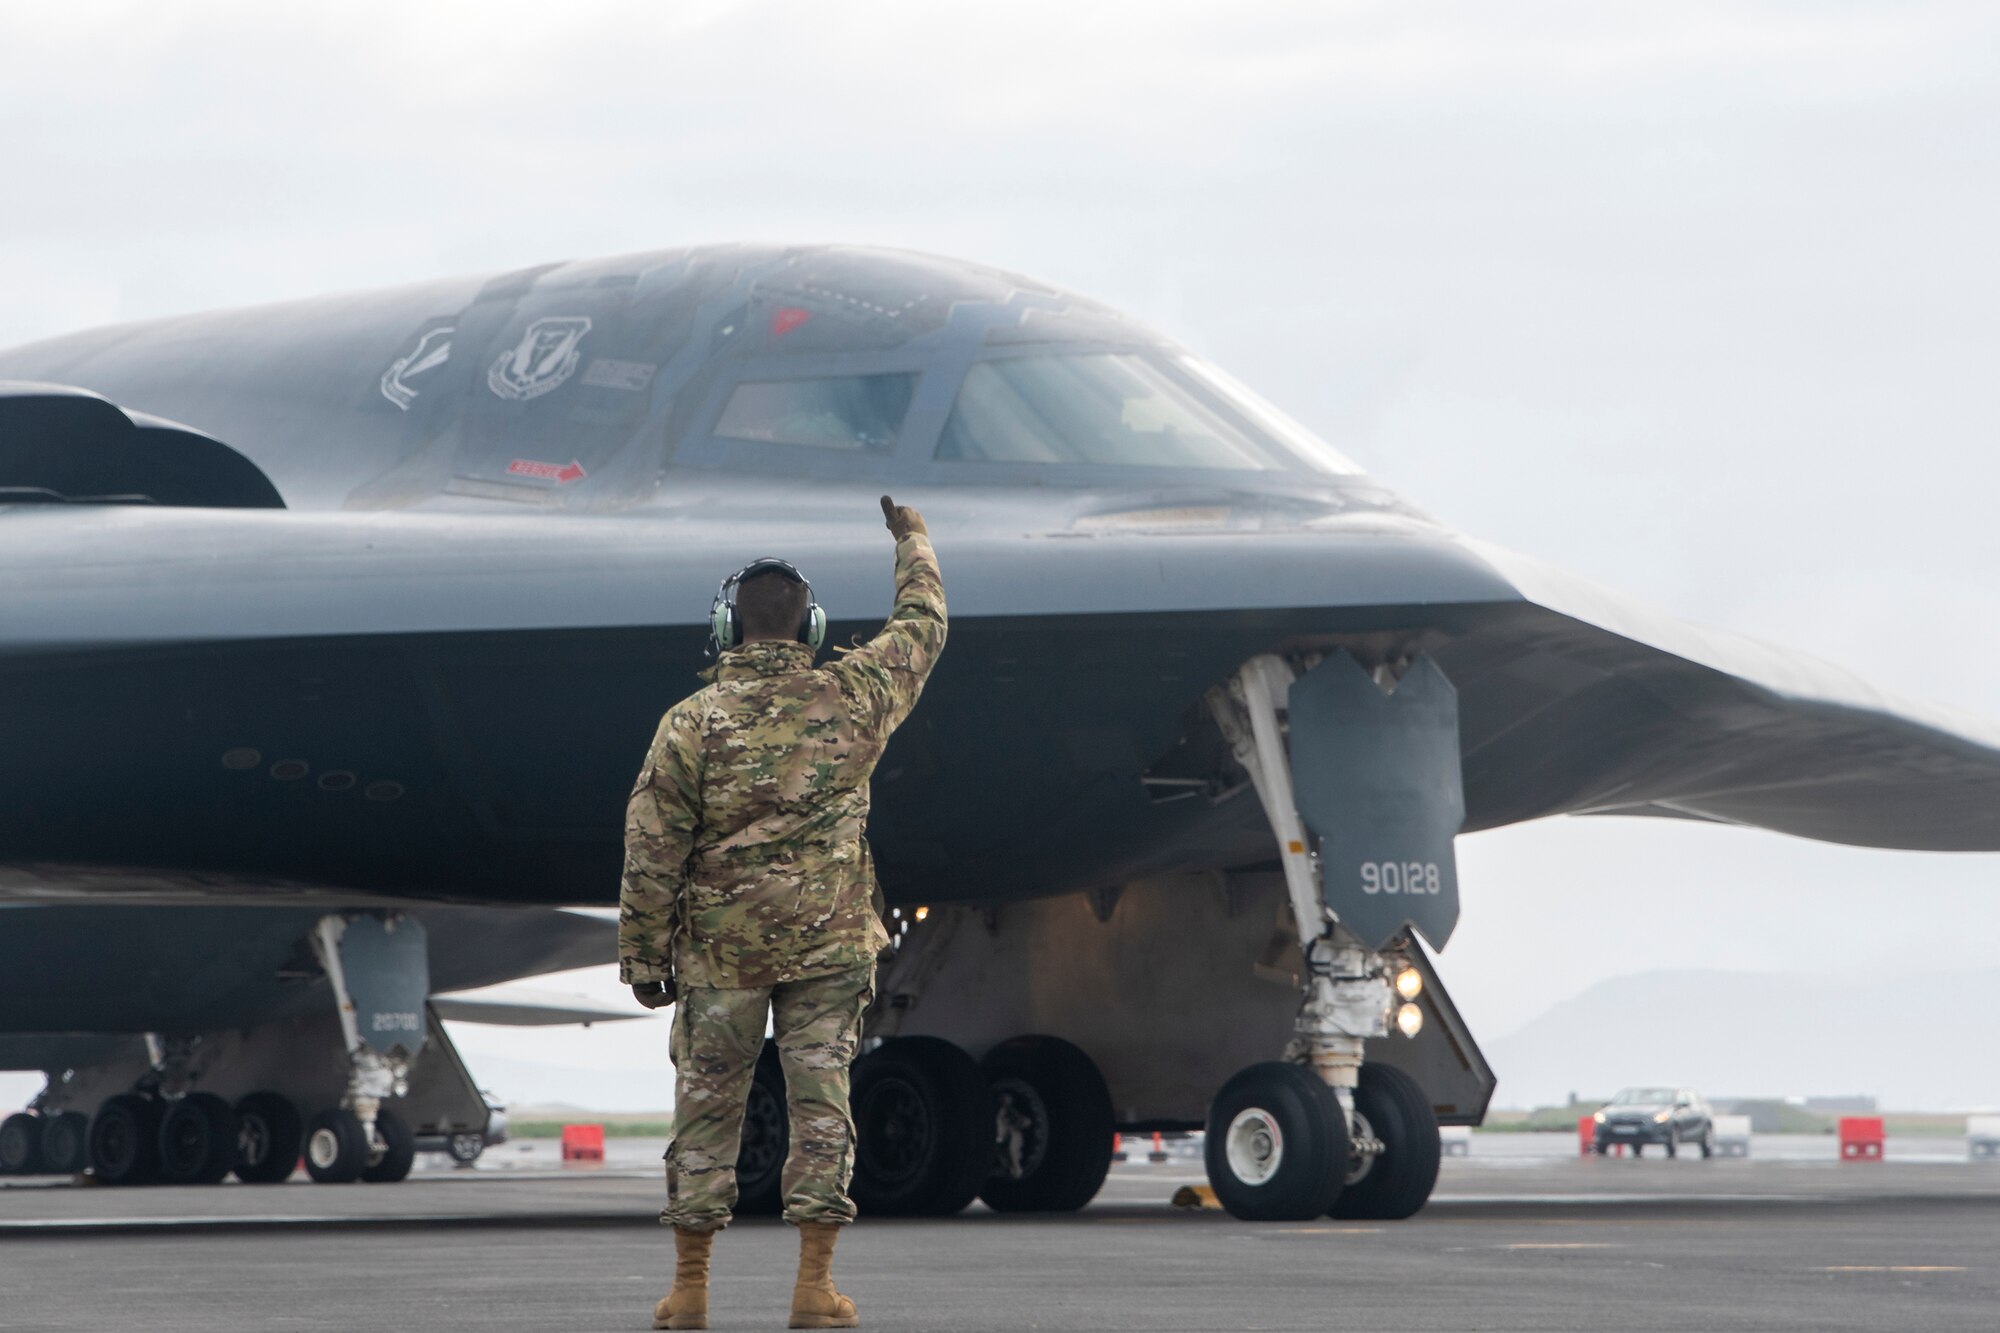 131st and 509th Bomb Wing crew chiefs prepare to launch three B-2 Spirit bombers Aug. 31, 2021, as part of a Bomber Task Force Europe deployment to Keflavik Air Base, Iceland. The total force exercise demonstrates U.S. capability for bomber agile combat employment and demonstrates America’s commitment to global security and stability. (U.S. Air National Guard photo by Master Sgt. John E. Hillier)